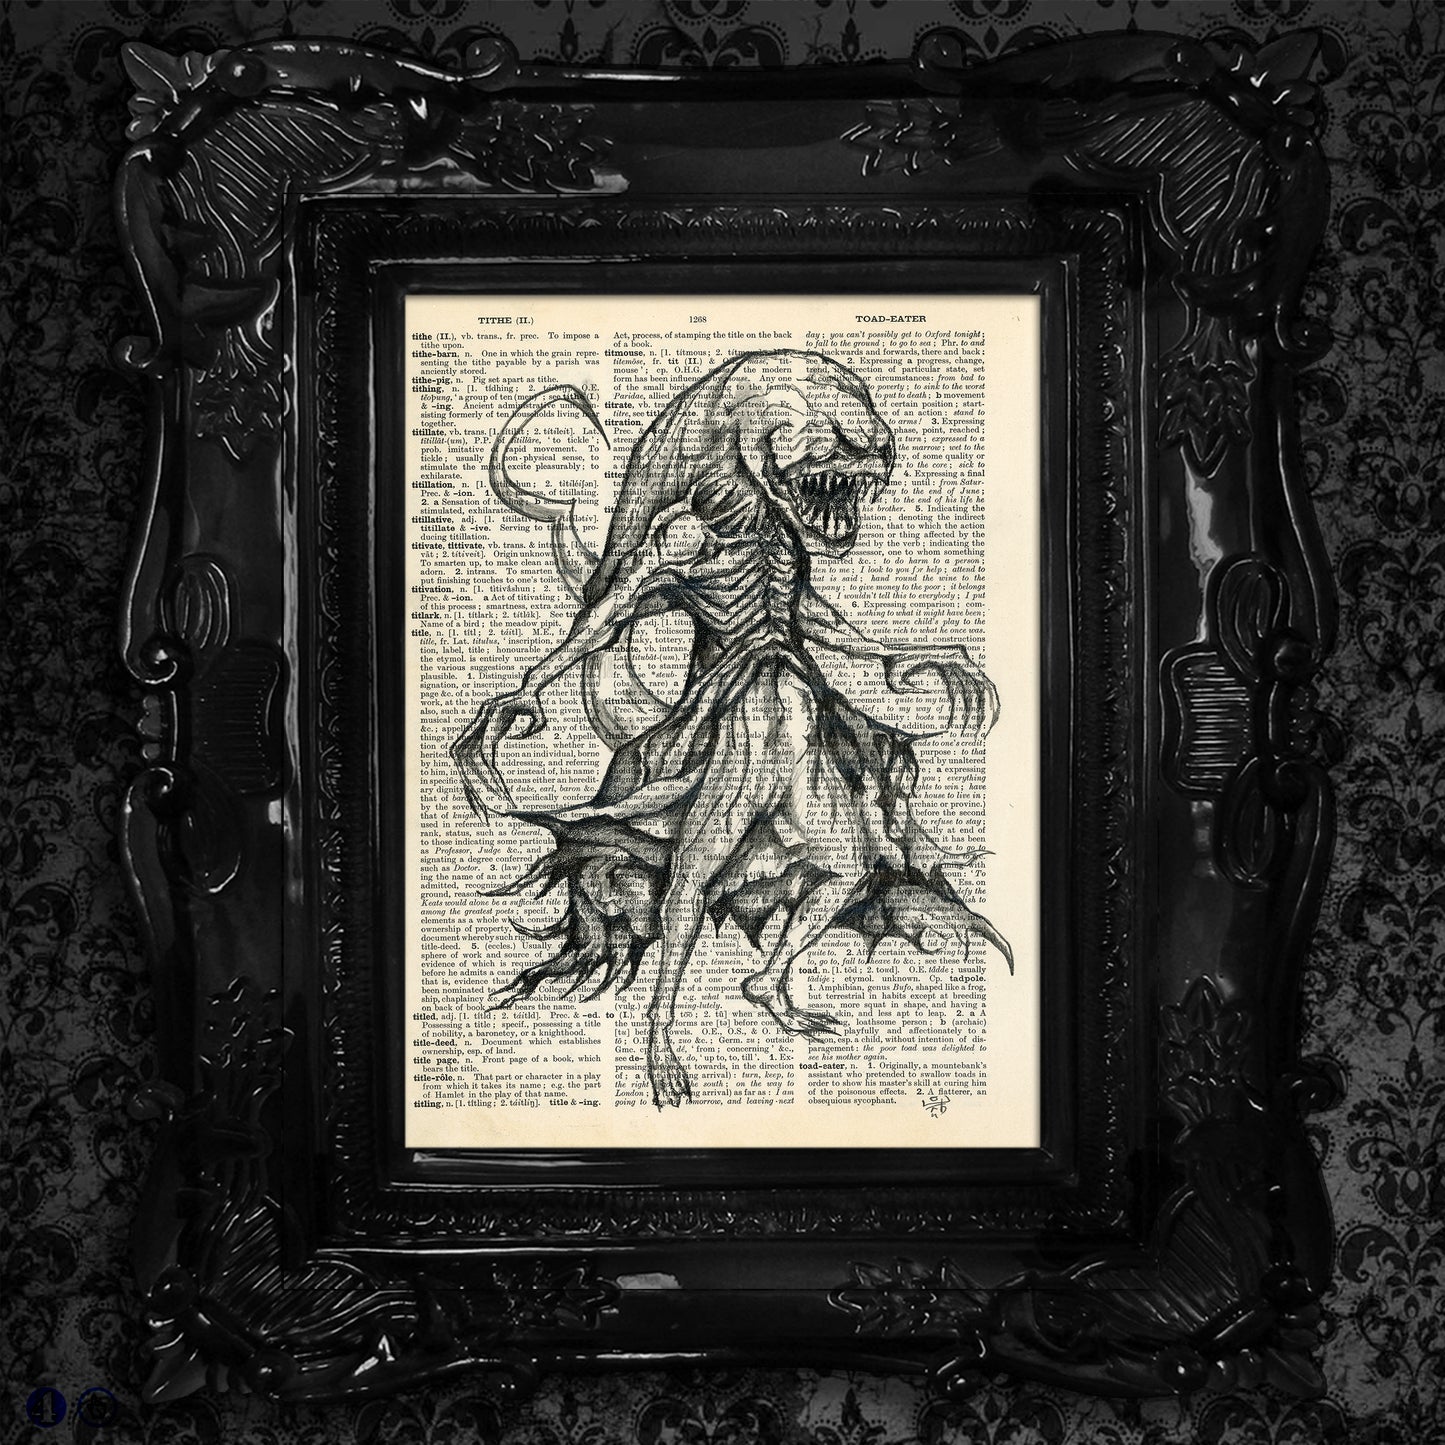 Pencil drawing of a "Xenomorph" on a vintage English dictionary page, blending horror art with historical whimsy.